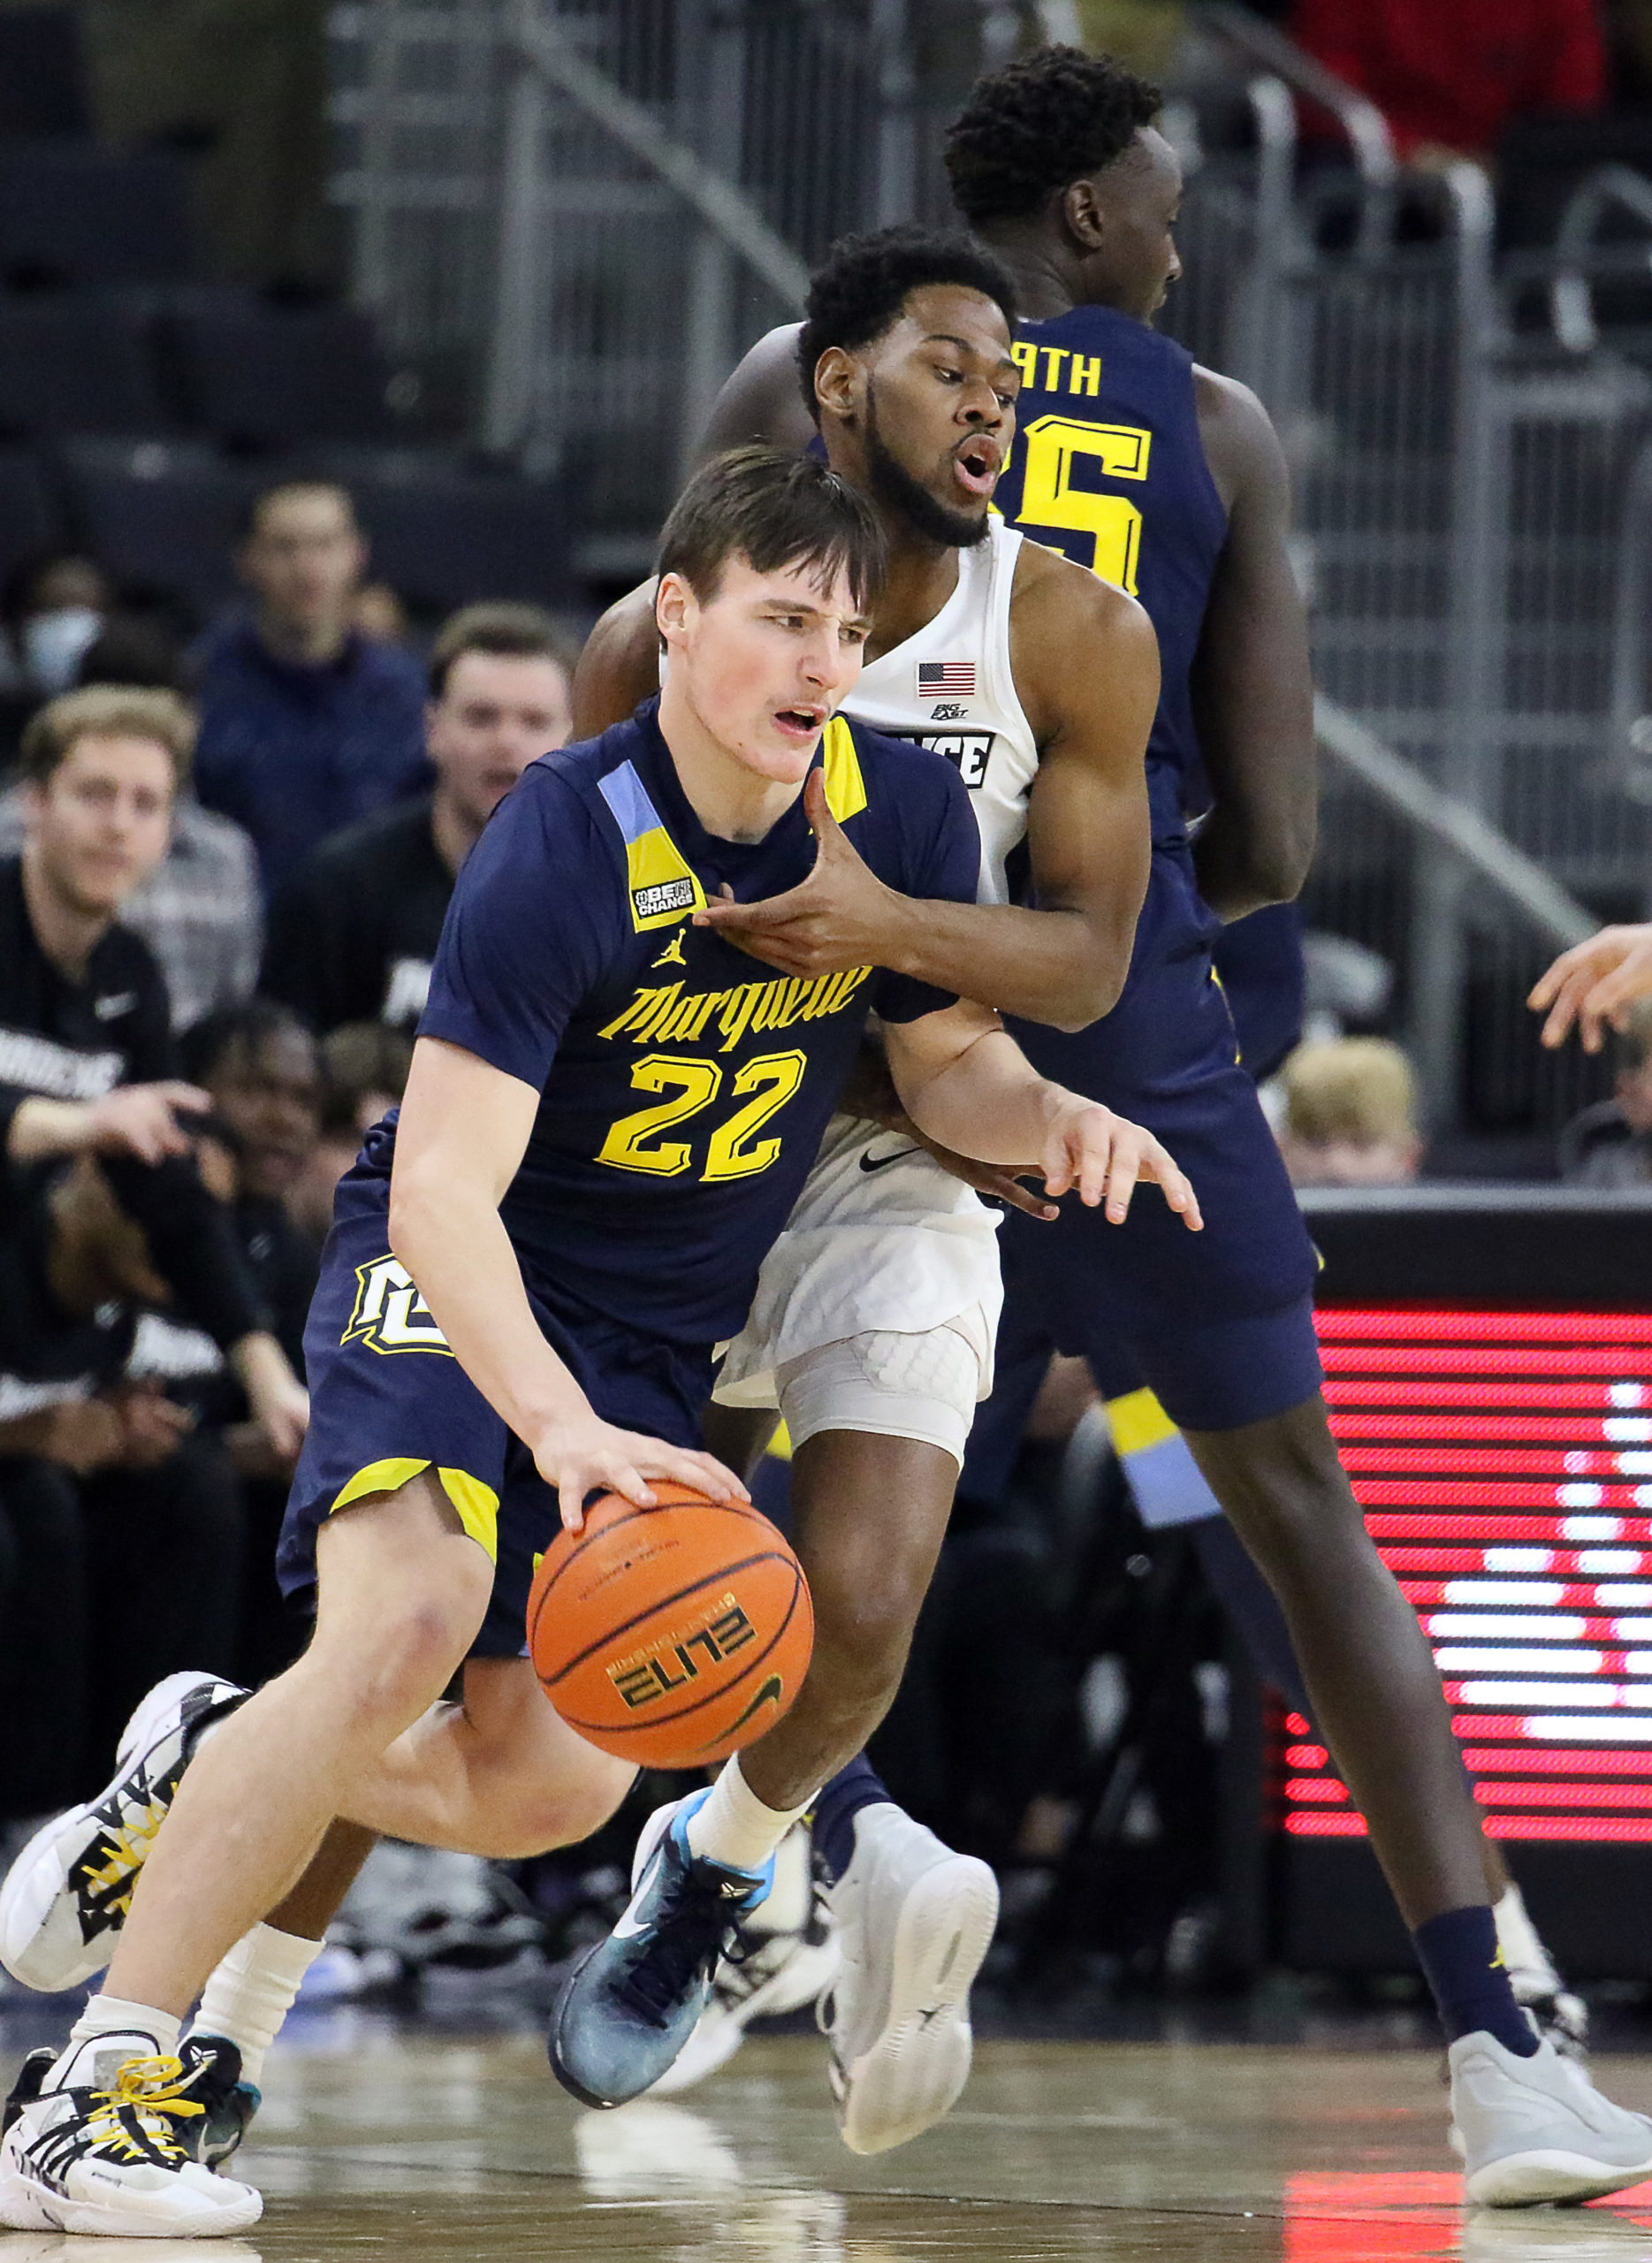 Marquette holds off late push, evens score with the Friars